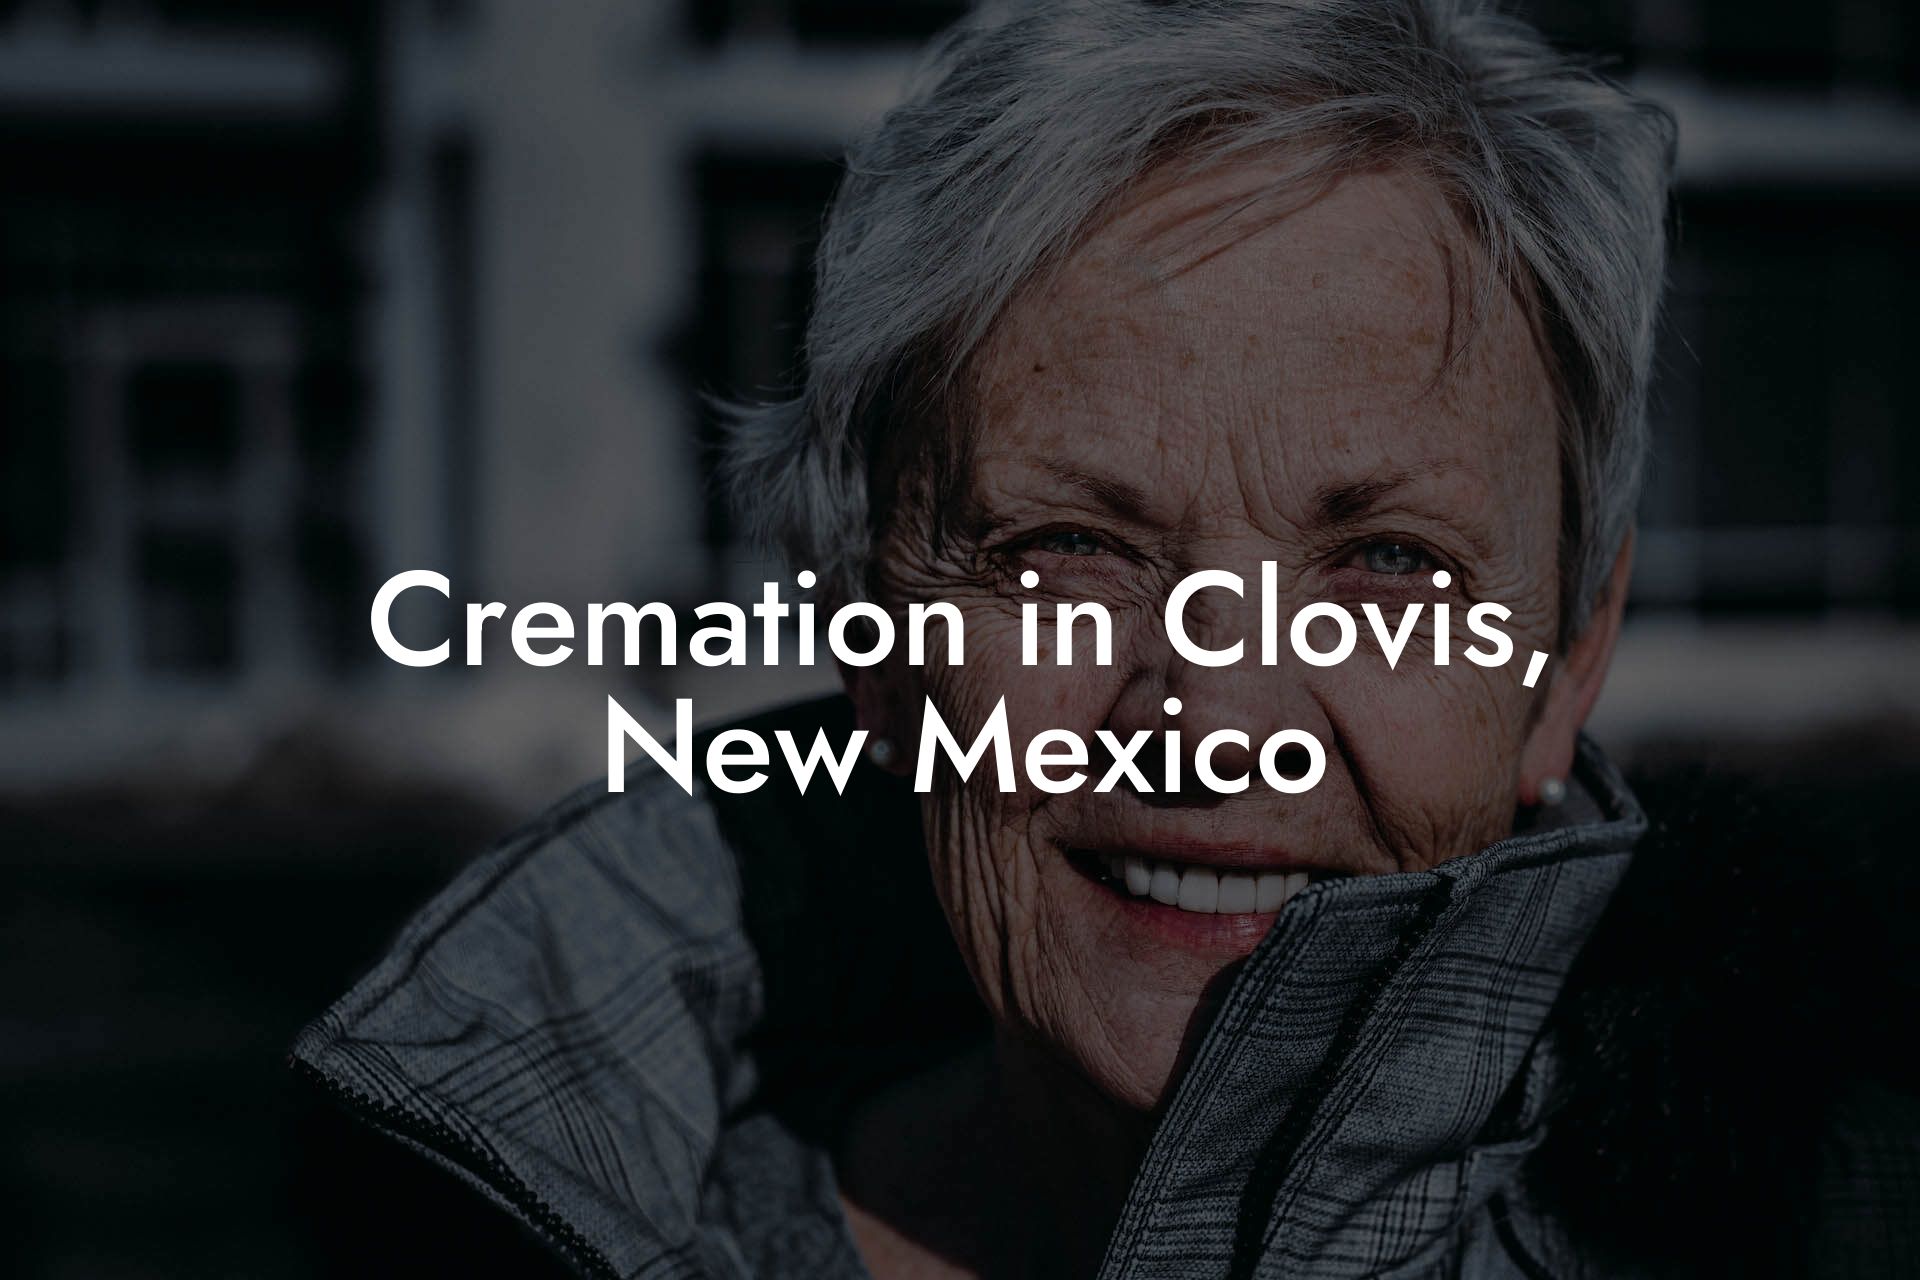 Cremation in Clovis, New Mexico